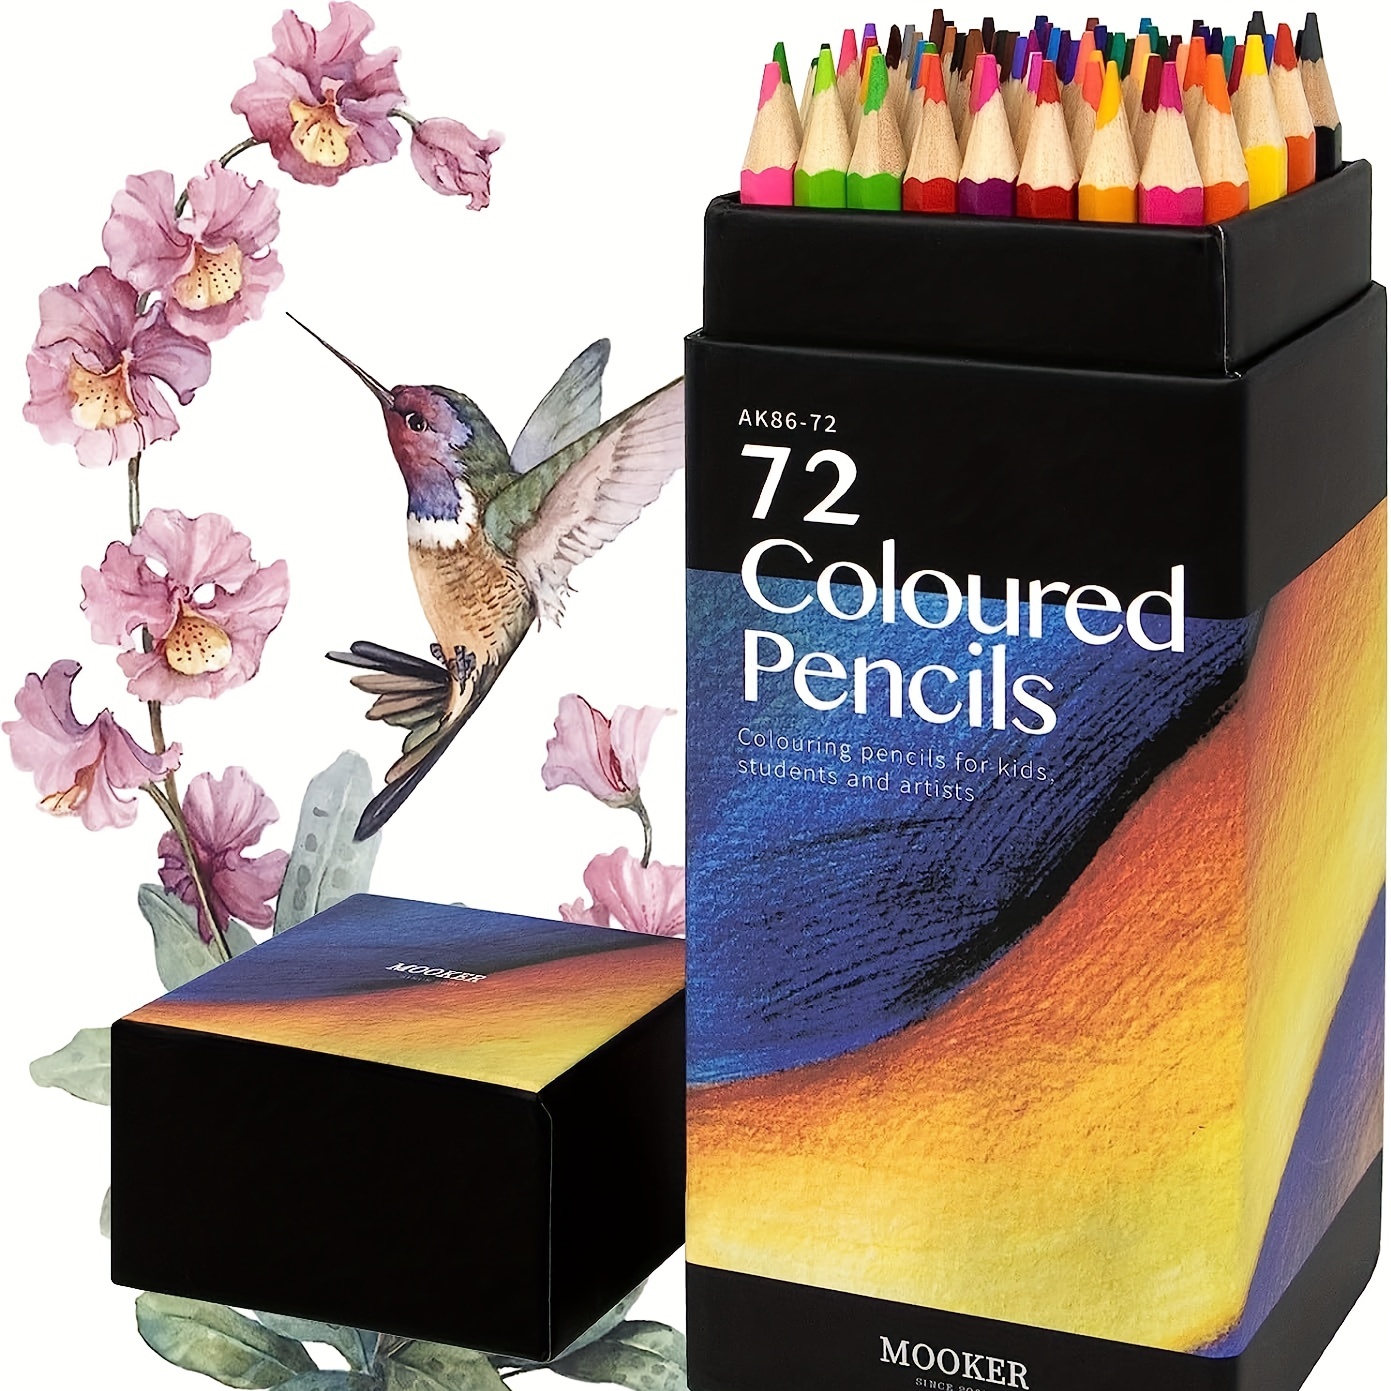 Faber-Castell Germany NEW Black Edition 48/72 Black Rods Oil Color Pencil  Soft Colored Pencil Coloring Drawing Kits Art Supplies